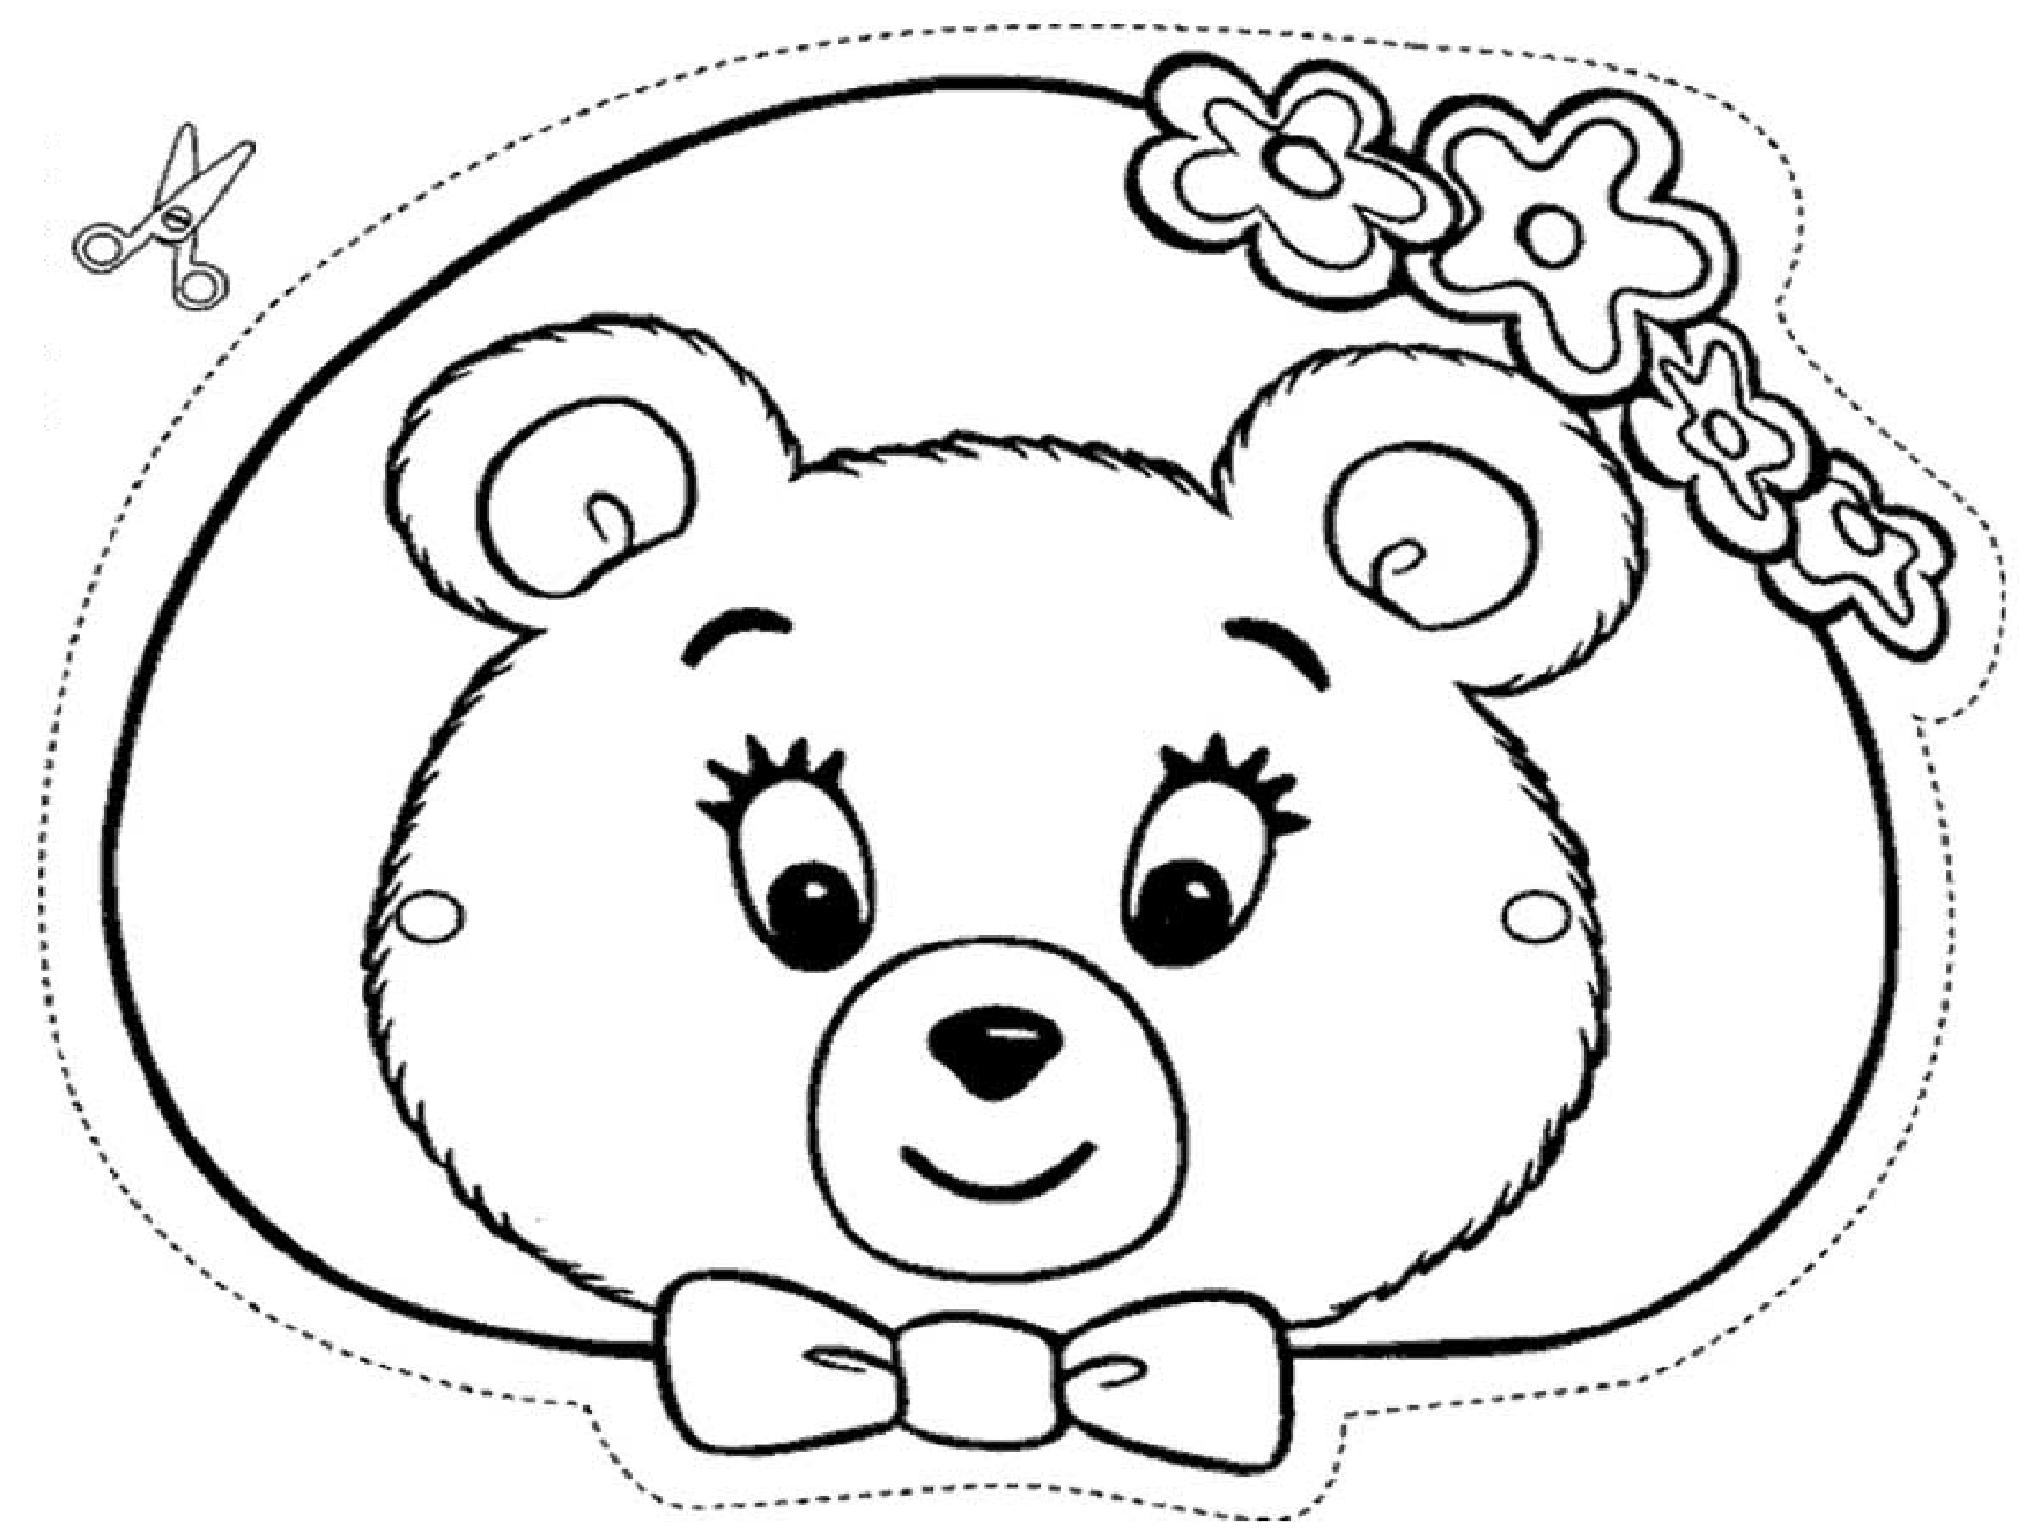 Teddy Bear Mask coloring page - free printable coloring pages on coloori.com